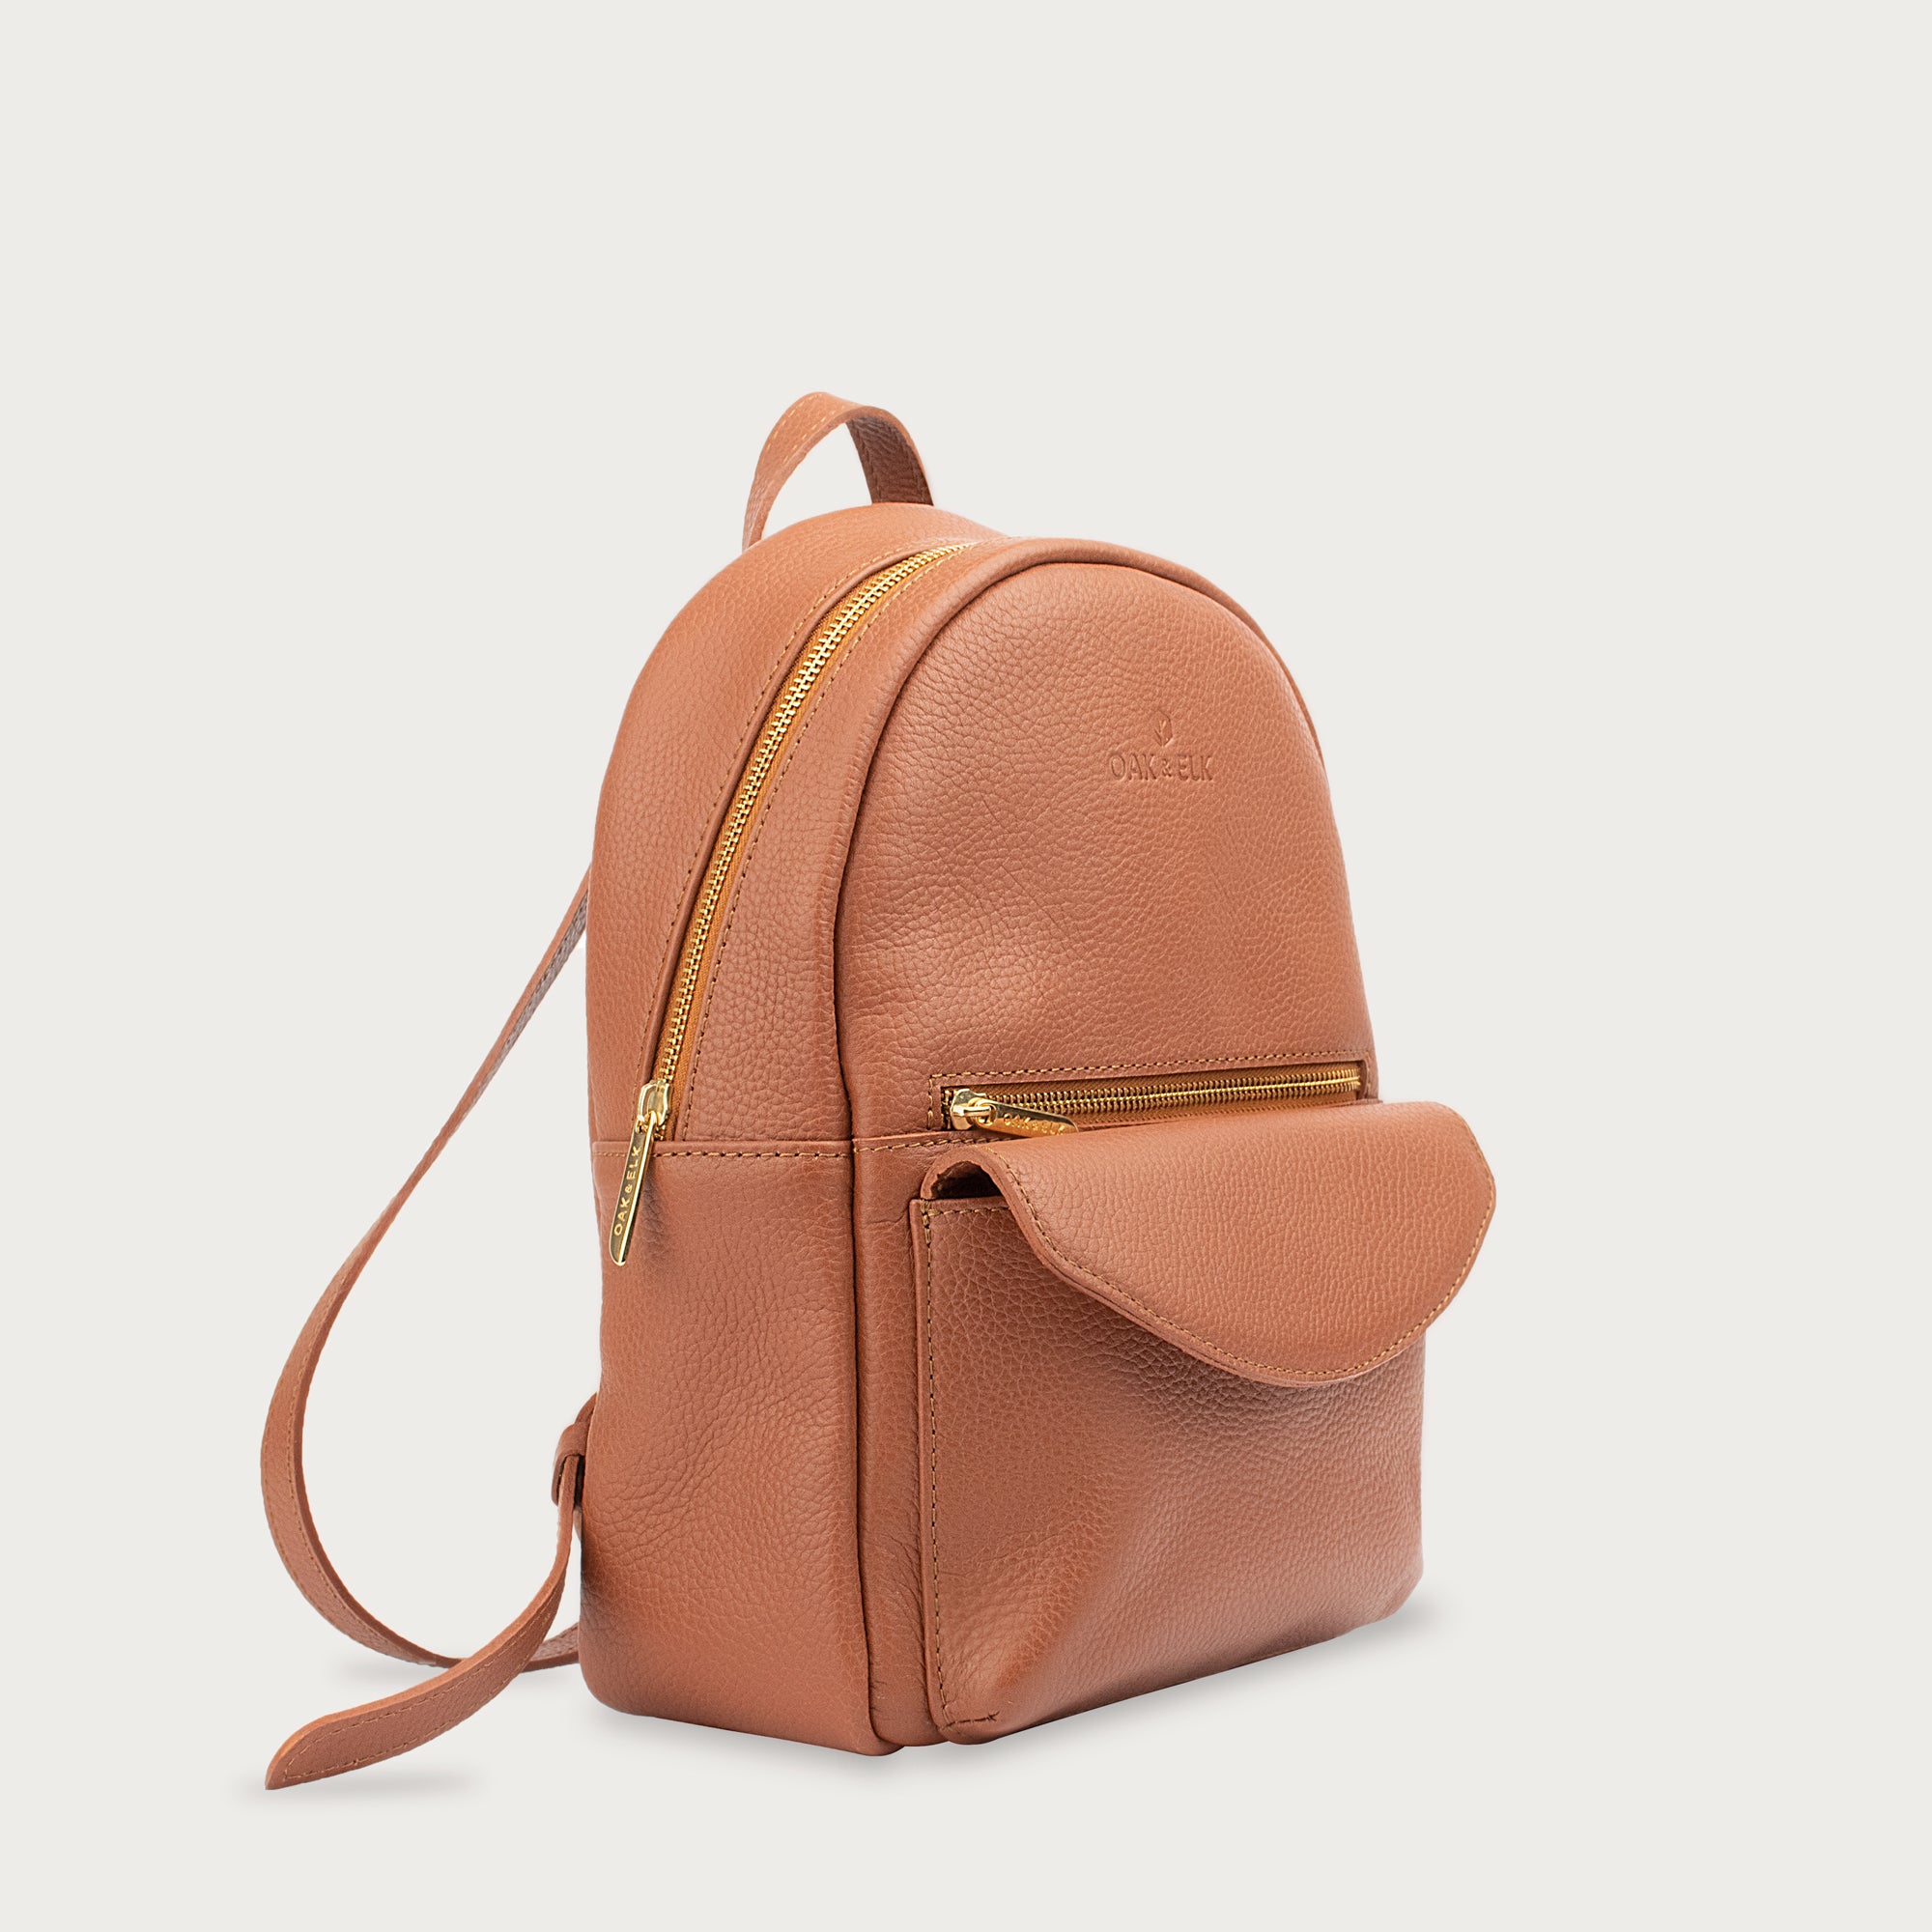 Greene Vegan Soft Leather Backpack Leather Purse For Work And Study | CLUCI